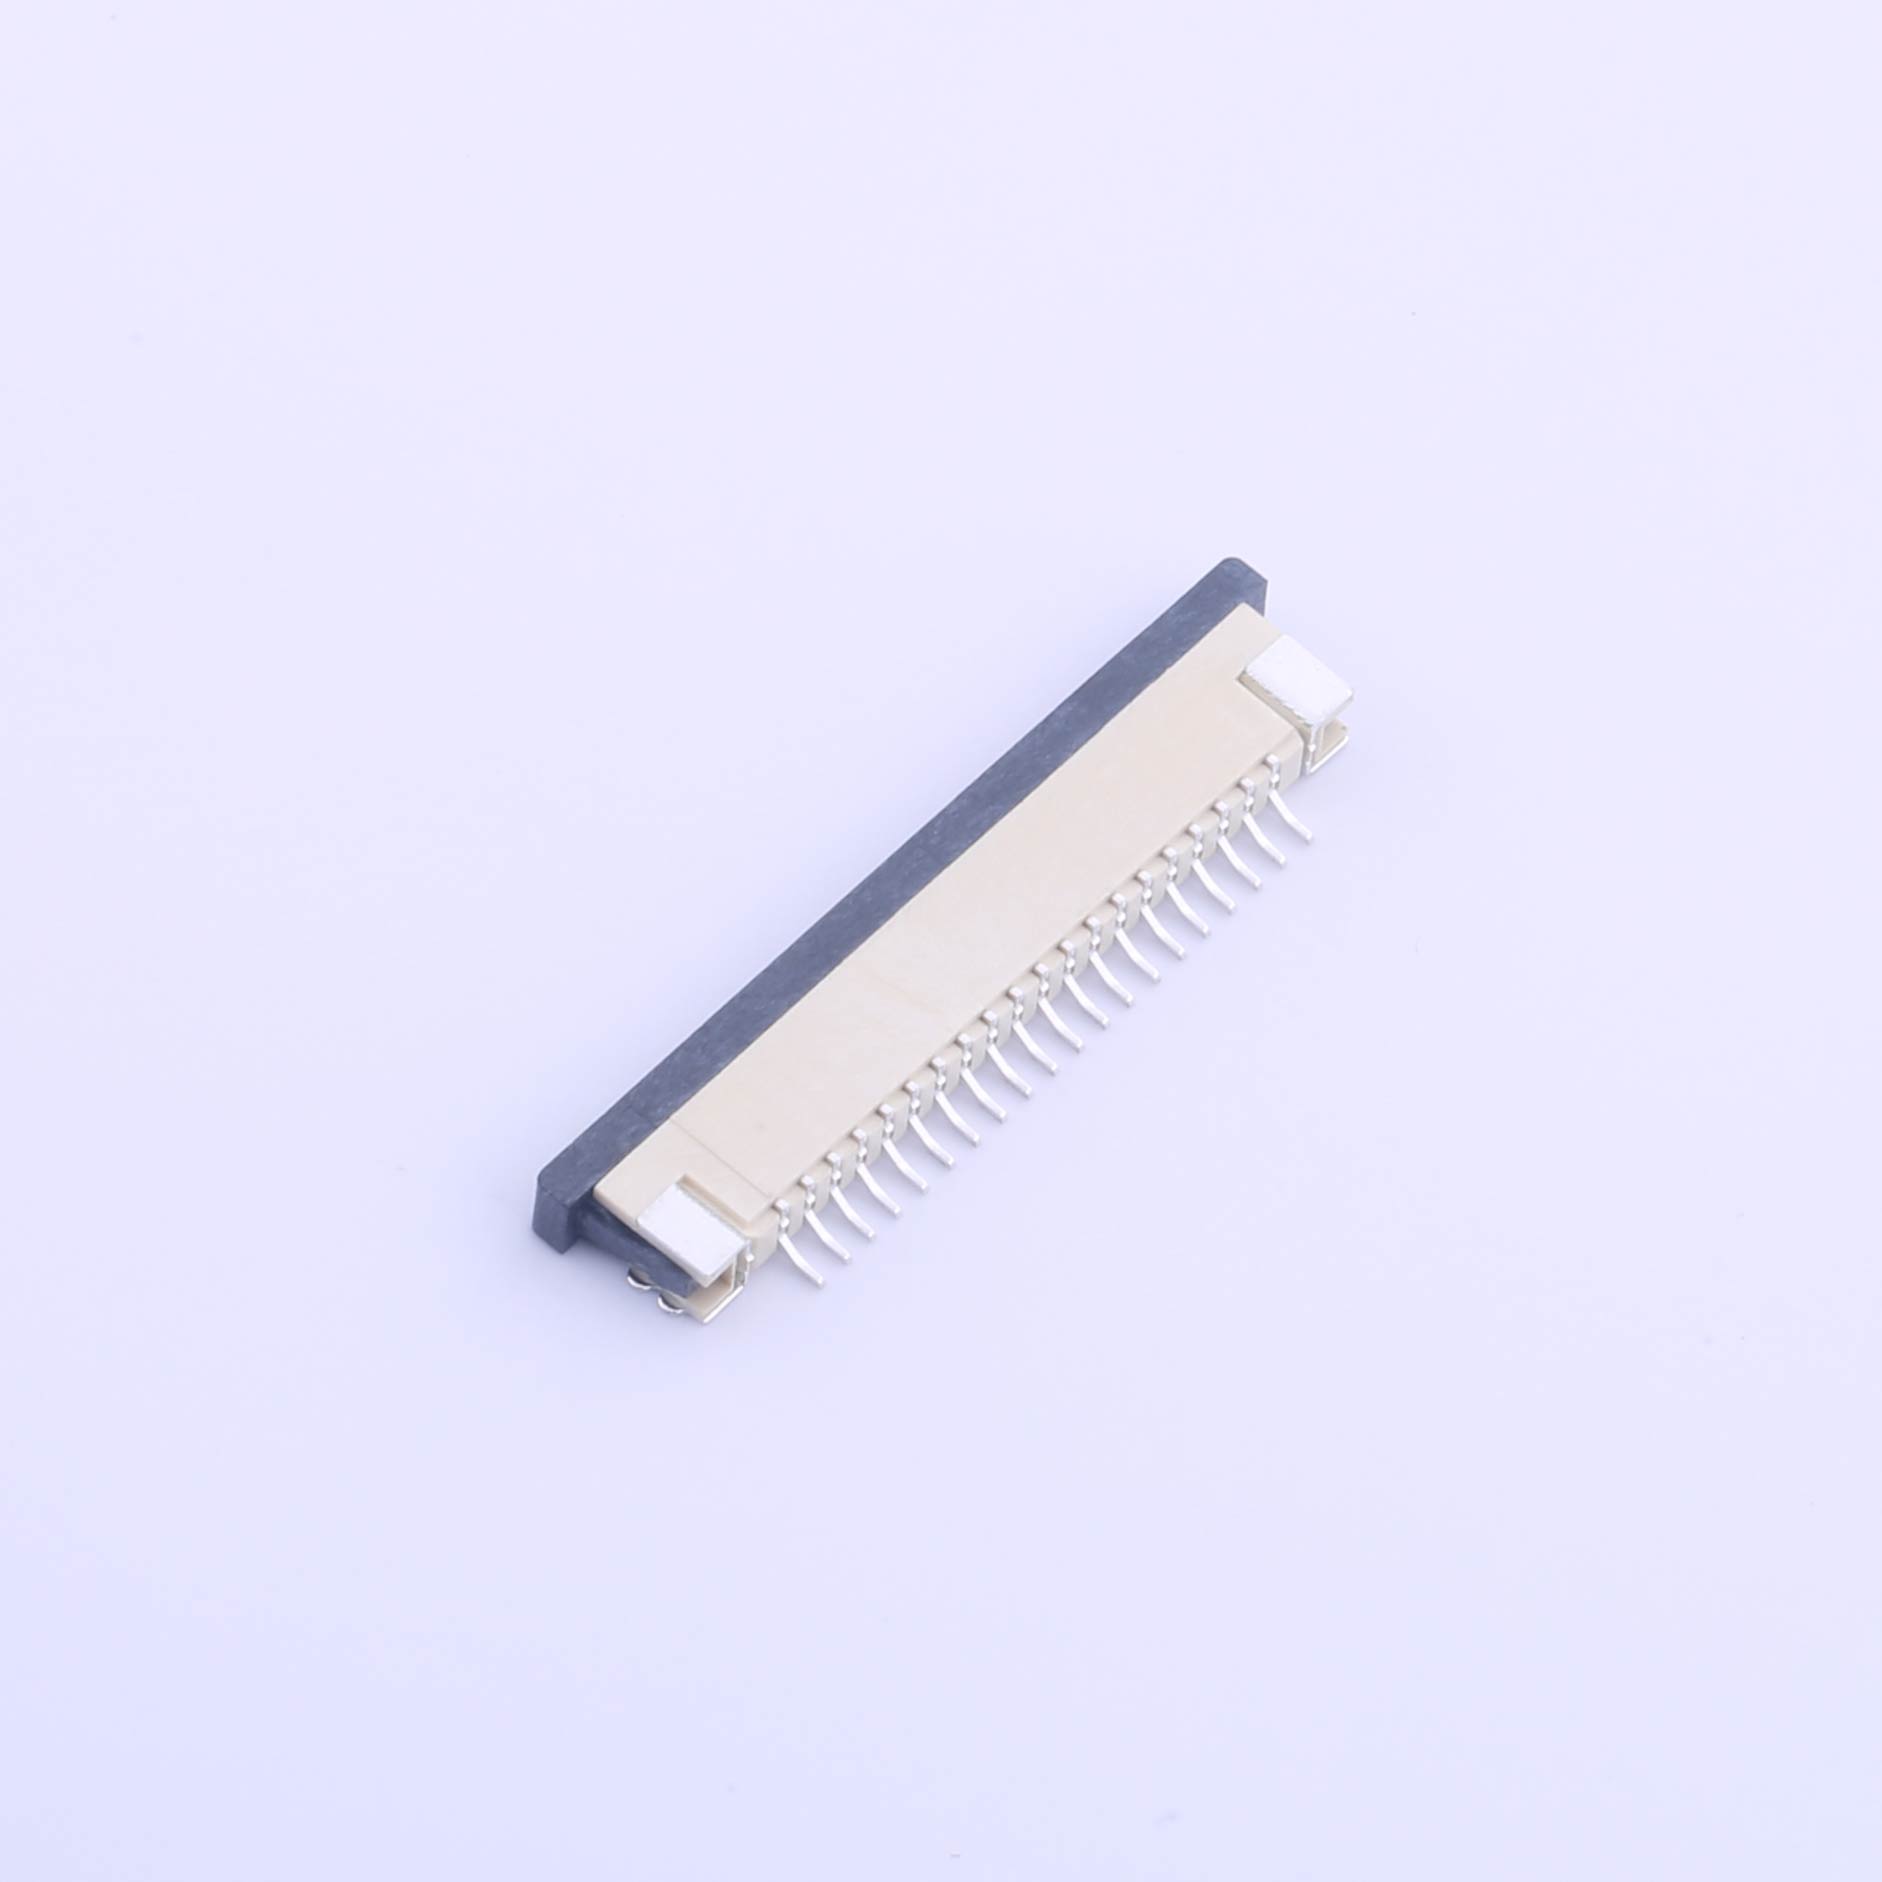 Kinghelm FFC/FPC Connector 20p Pitch 1mm - KH-CL1.0-H2.5-20pin